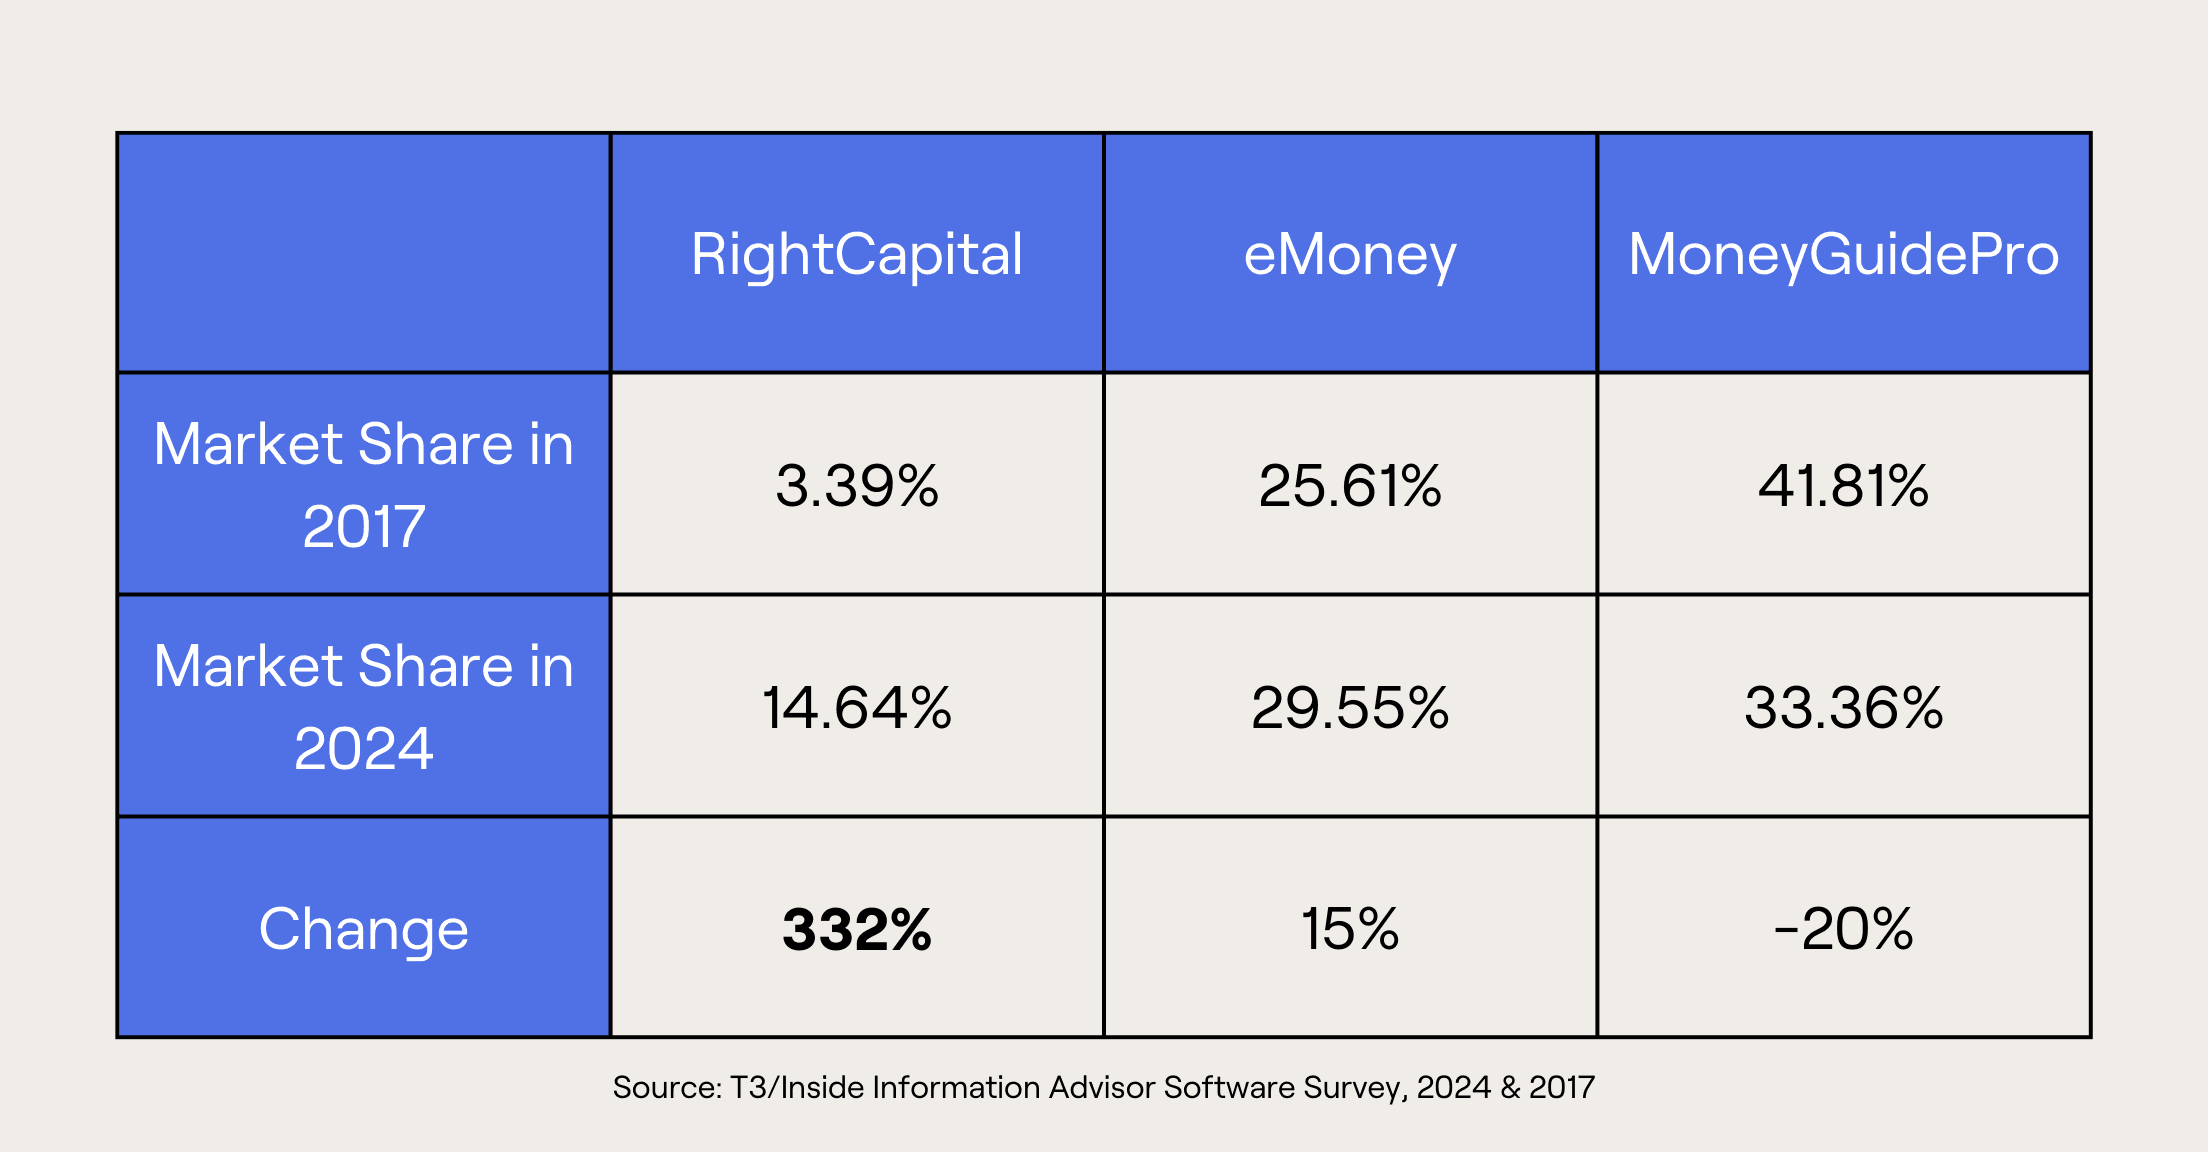 Chart showing market growth up 332% for RightCapital from 2017 to 2024 according to respondents in the T3/Inside Information Advisor Software Survey